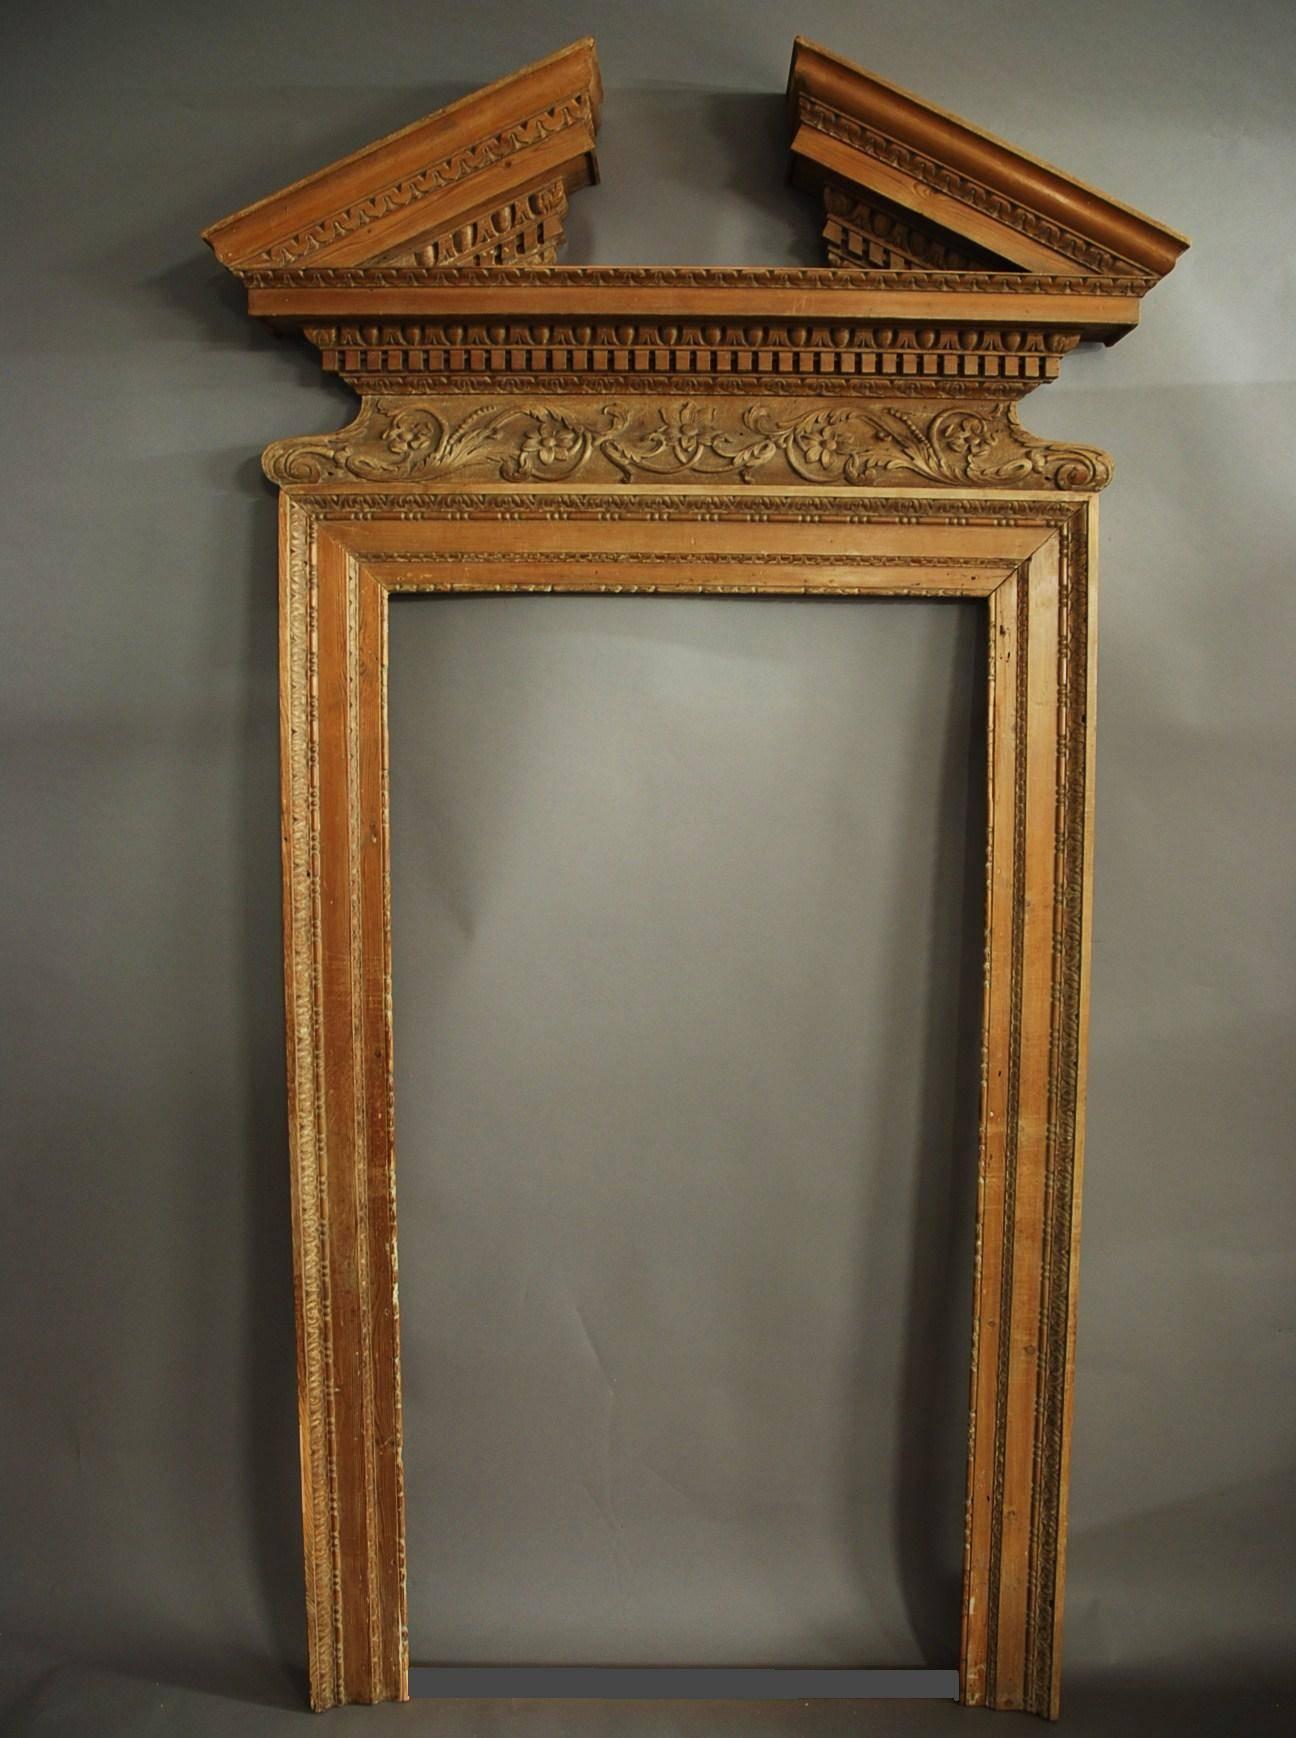 A large and impressive pair of mid-18th century pine door surrounds (or frames) with broken pediment in the Classical design.

These surrounds consist of a carved broken pediment with carved designs including egg and dart decoration.

This leads